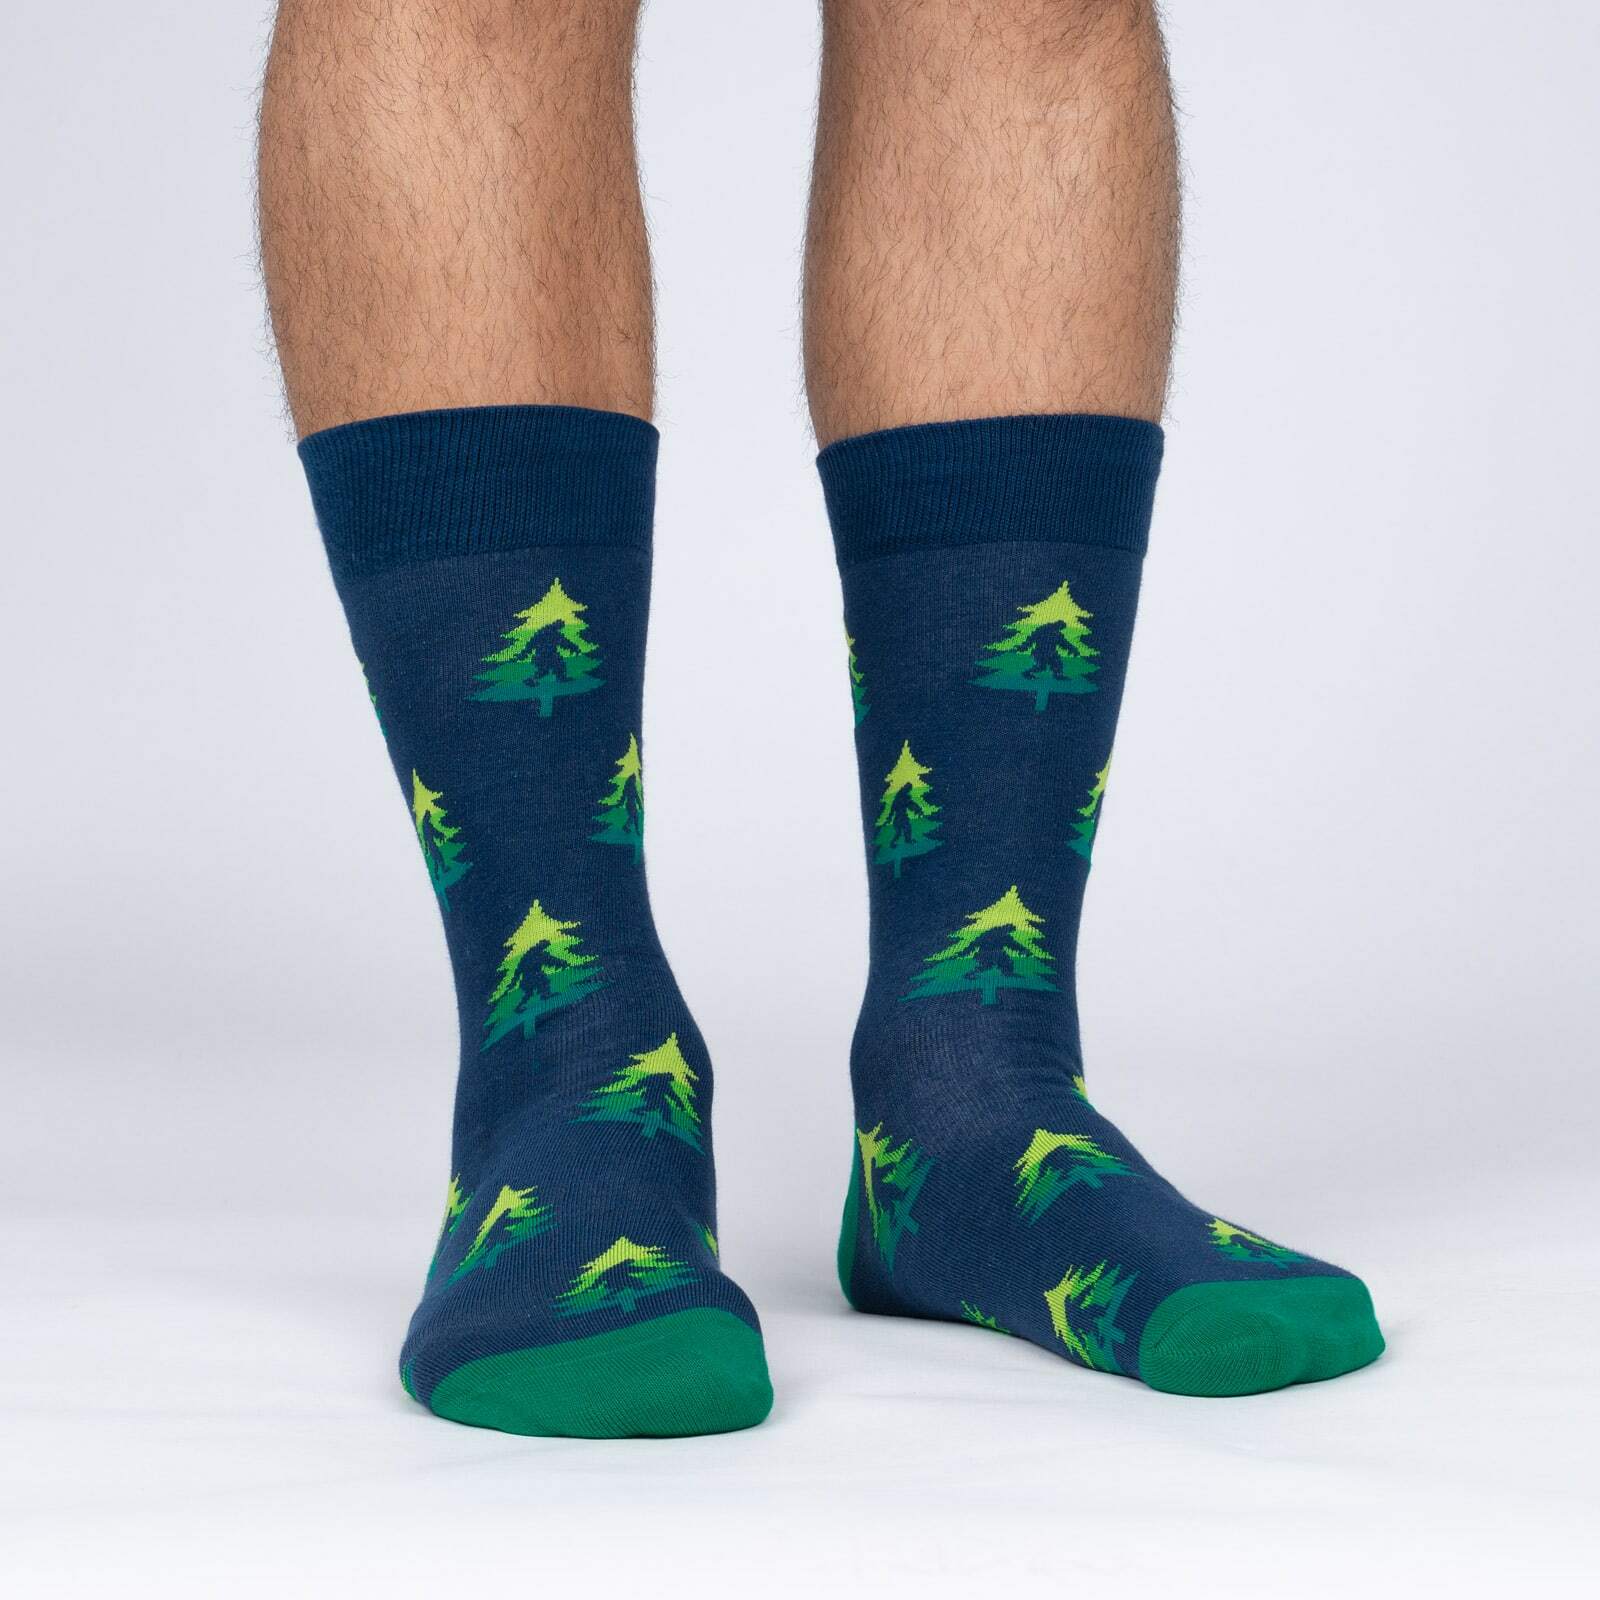 Sock It To Me Do You Tree What I Tree men's crew sock featuring blue sock with green trees that have a Sasquatch silhouette inside them. Socks worn by model seen from the front. 